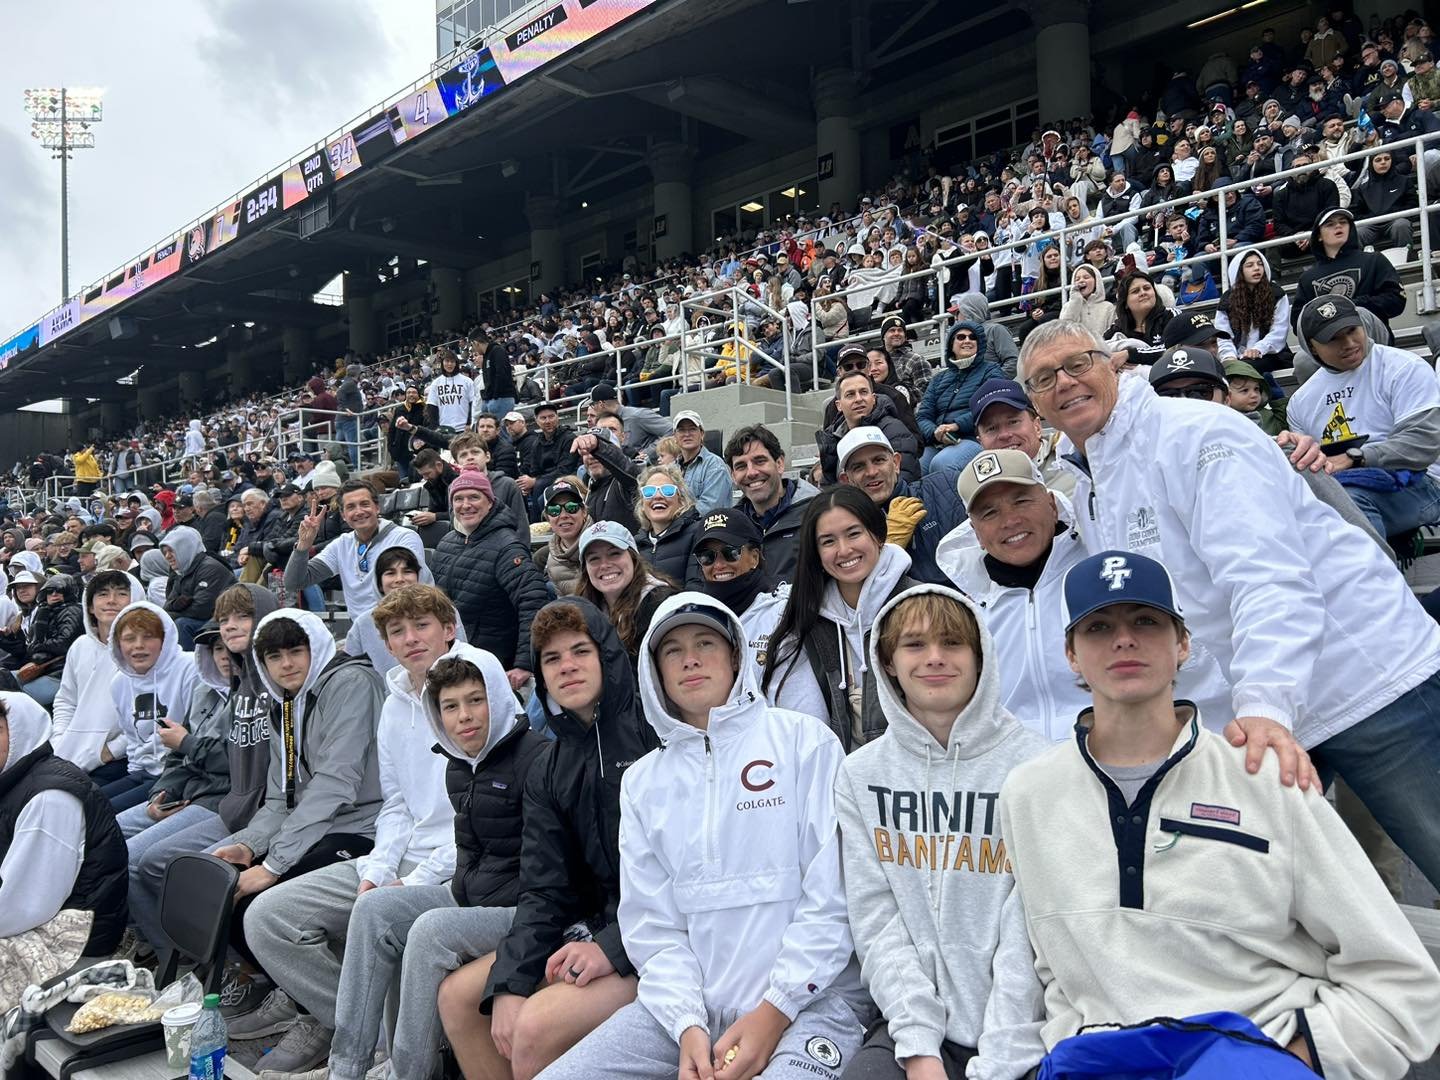 Boys 5A and 8A out in full force as #13 Army defeats Navy at West Point. Current 5A (and former 8A) Coach Marko Kostovic is a former captain and an Army legend.  We are so grateful to have him in our program teaching skills on and off the field! 🇺🇸